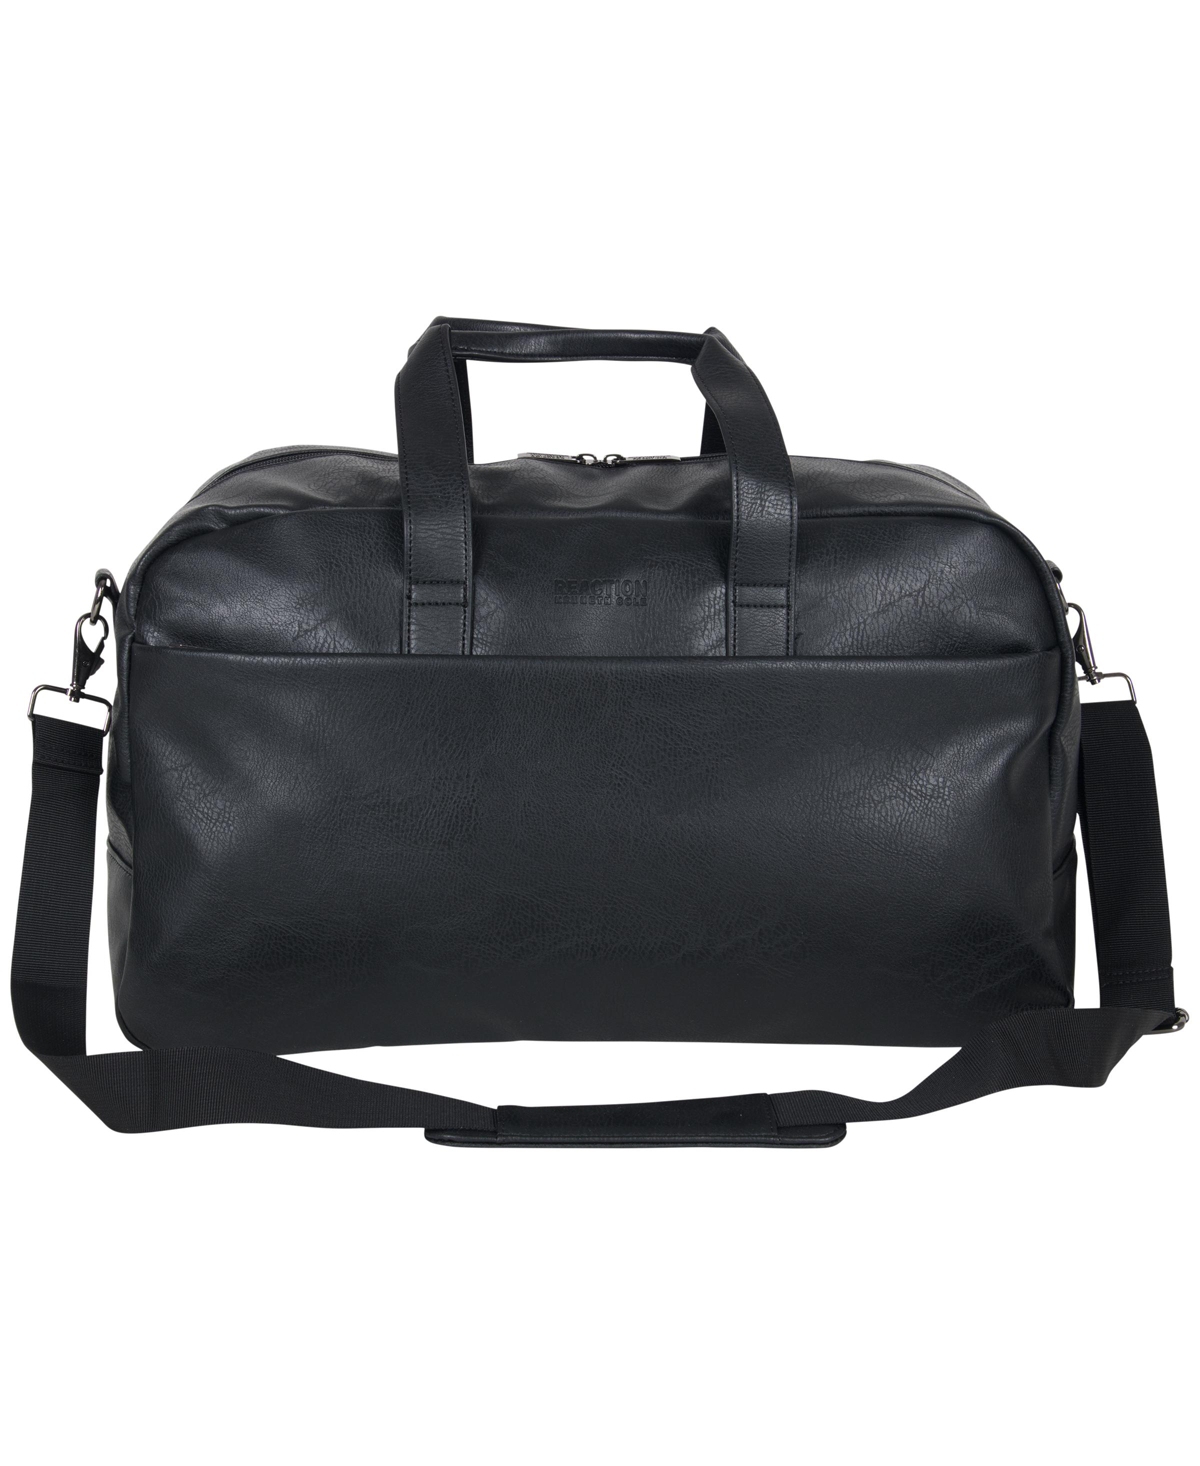 20" Faux Leather Lightweight Carry-On Travel Duffel - Black